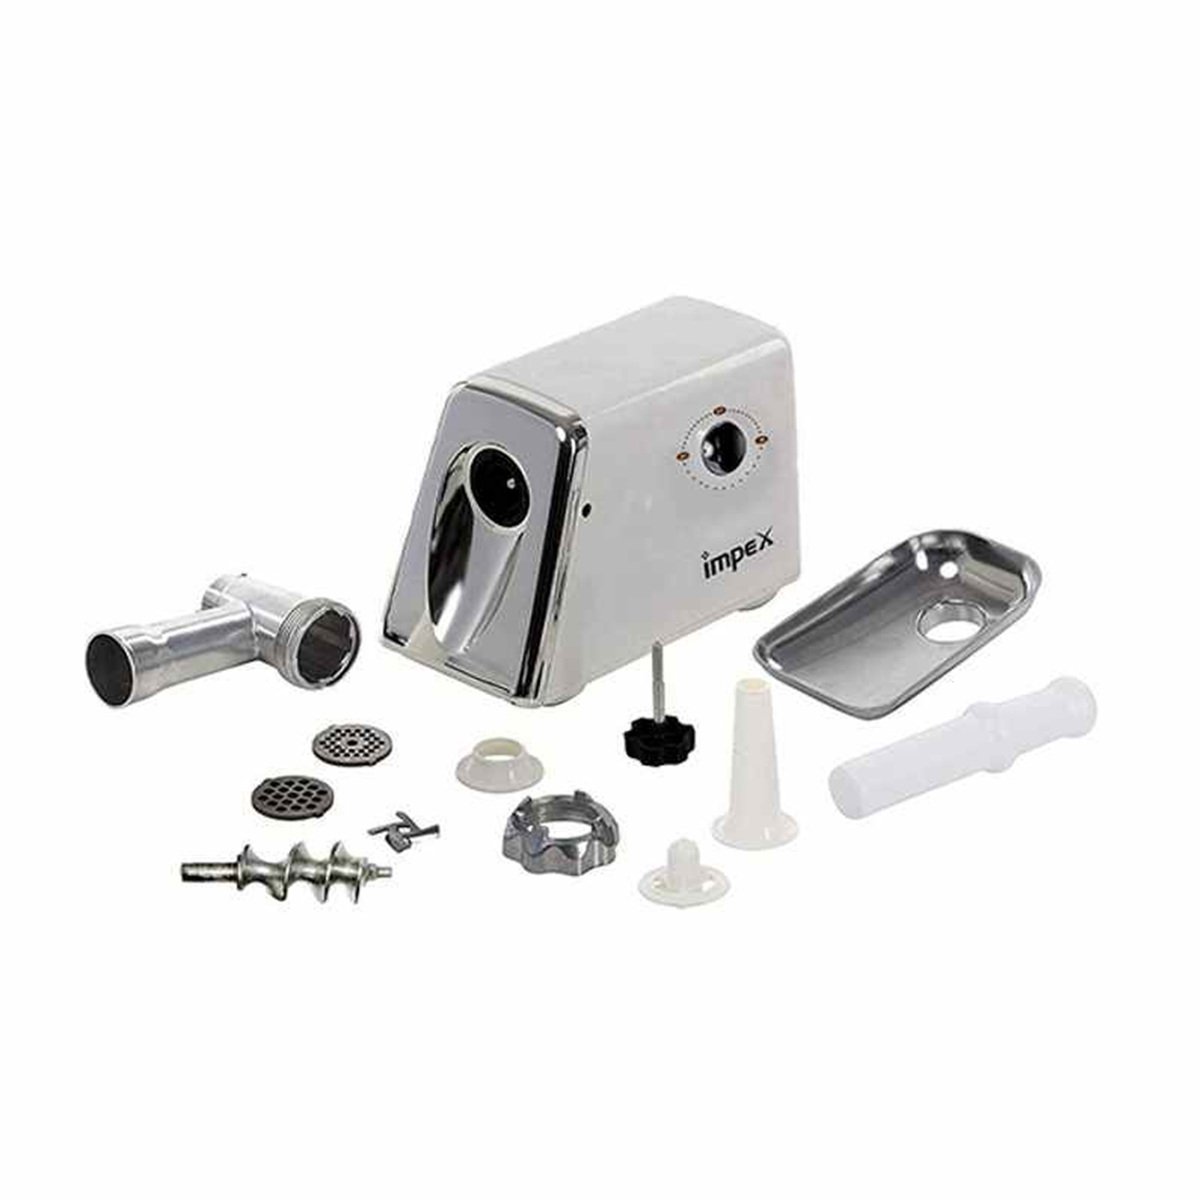 Impex Meat Grinder MG3801 1800W